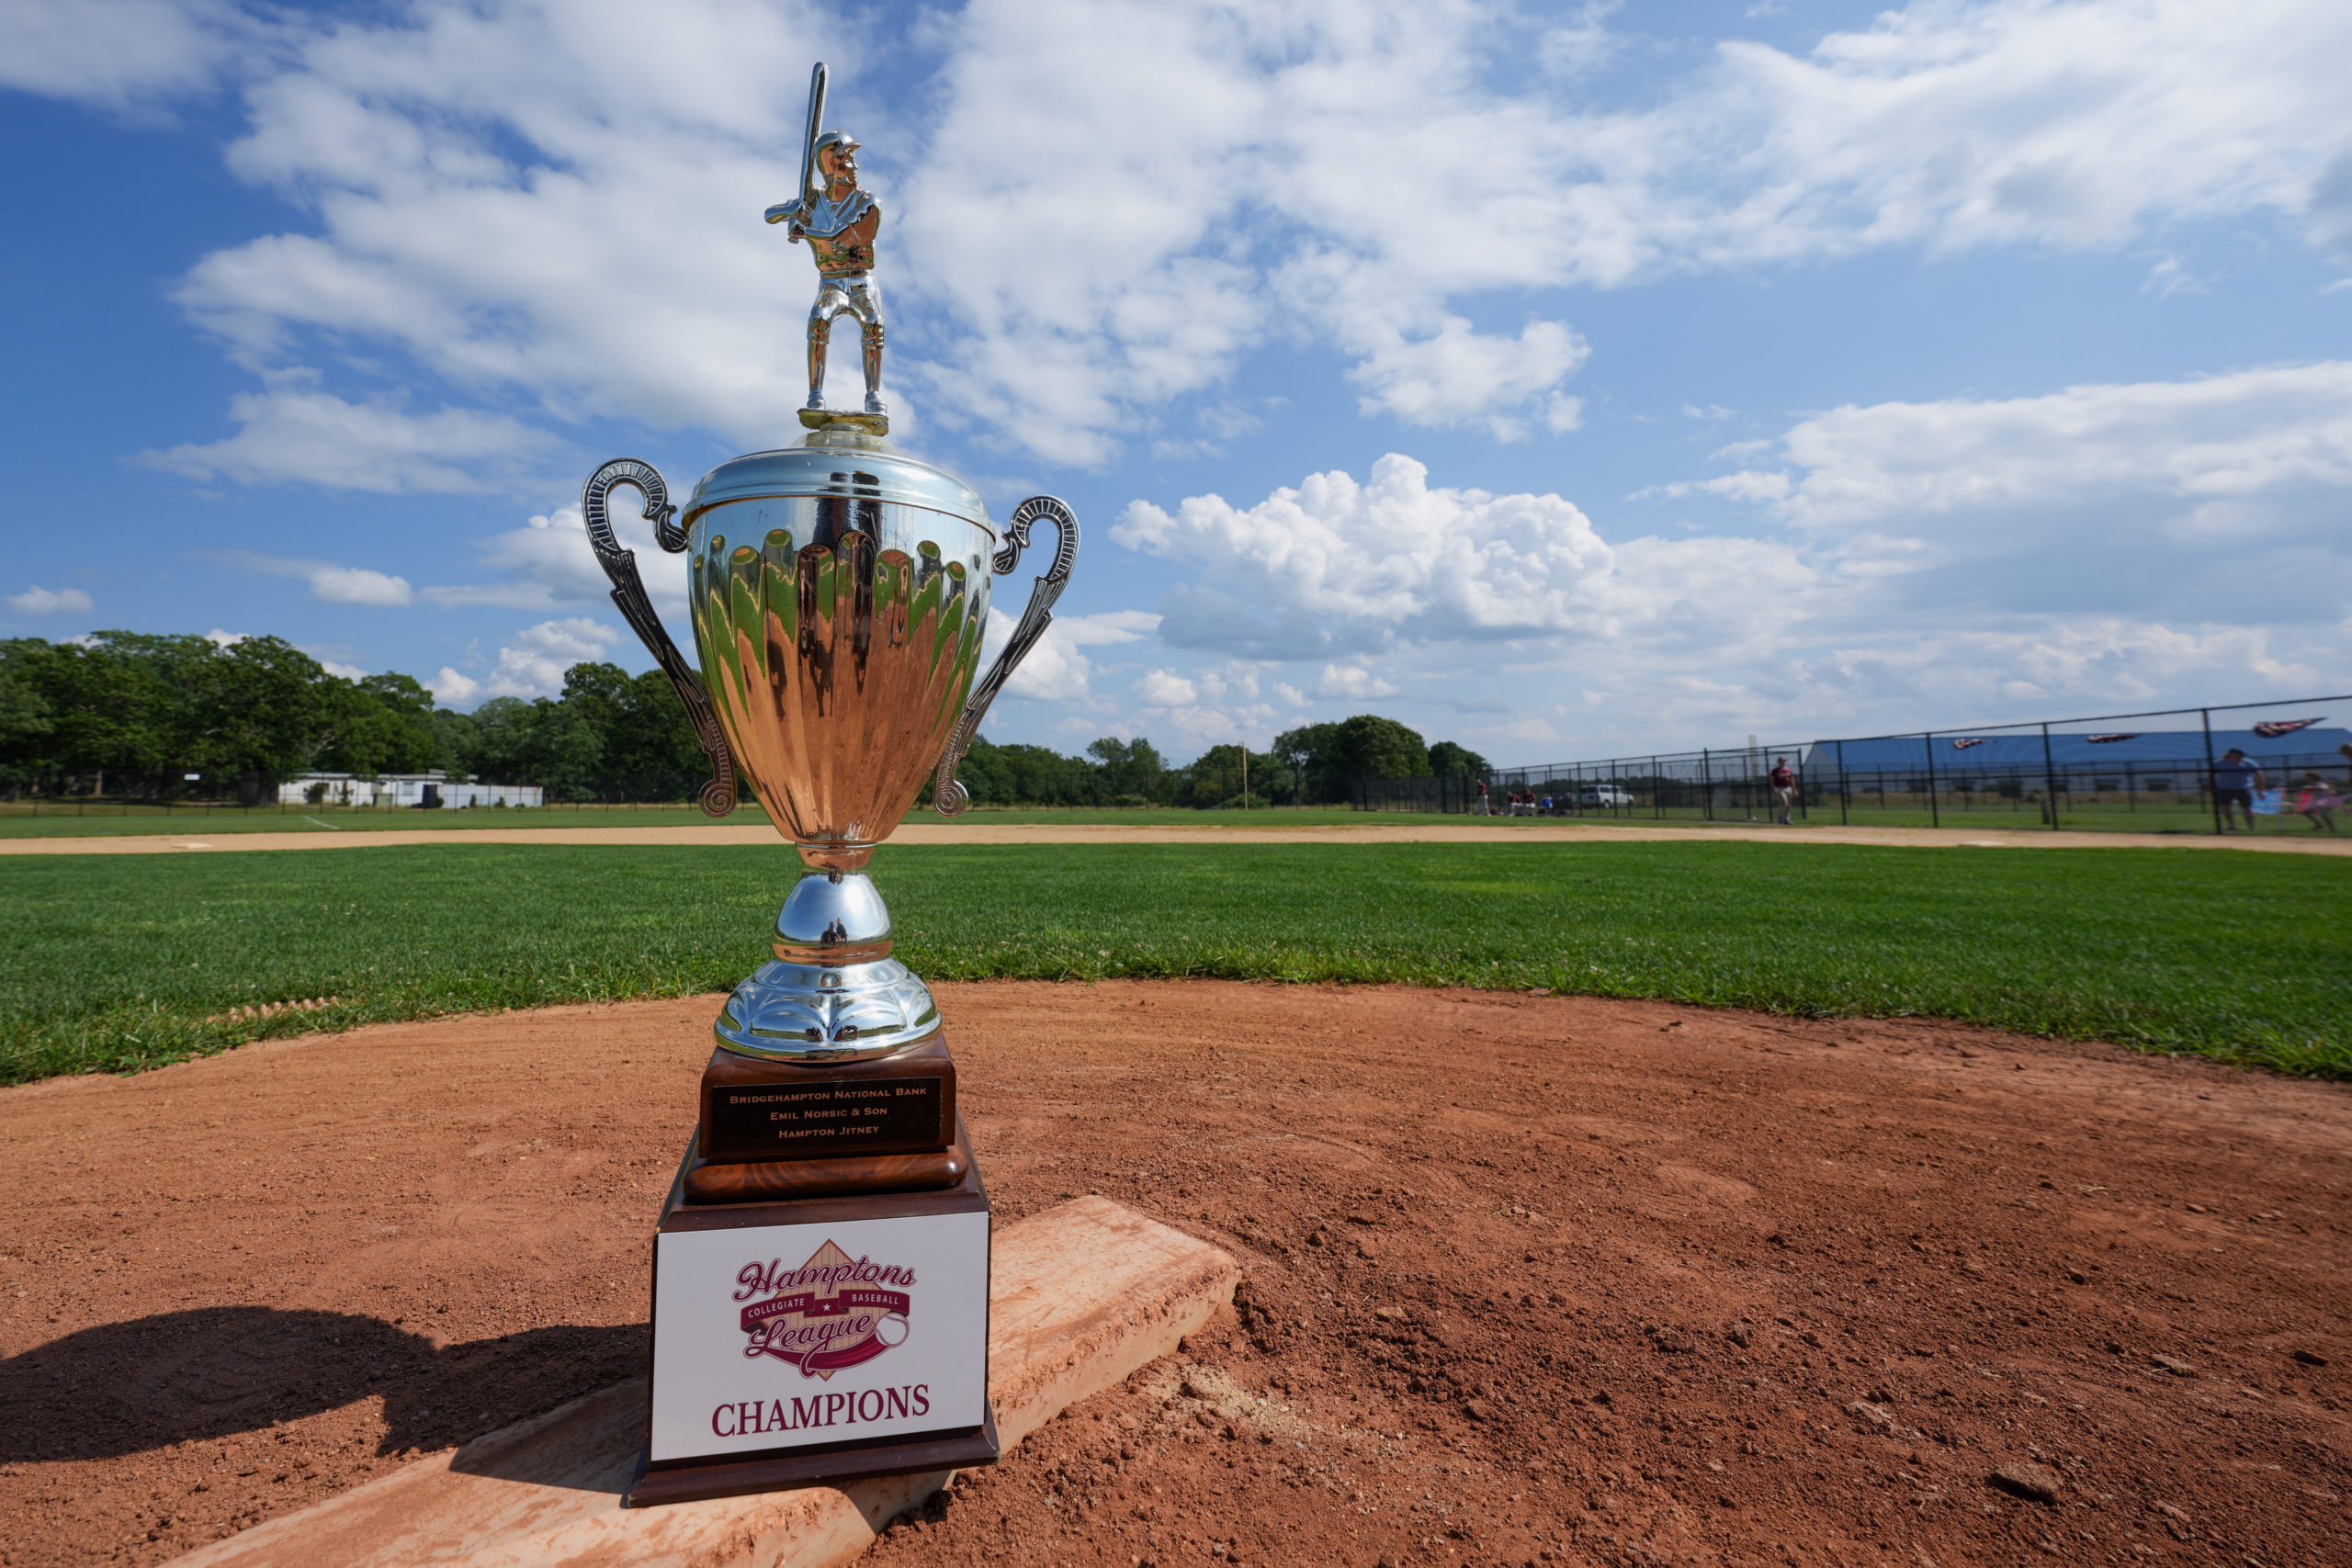 The Hamptons Collegiate Baseball League hosted its championship series last week. The Southampton Breakers won the best-of-three series, winning the first game, 9-1, on July 28, then the second game, 6-0, on Friday, July 30.